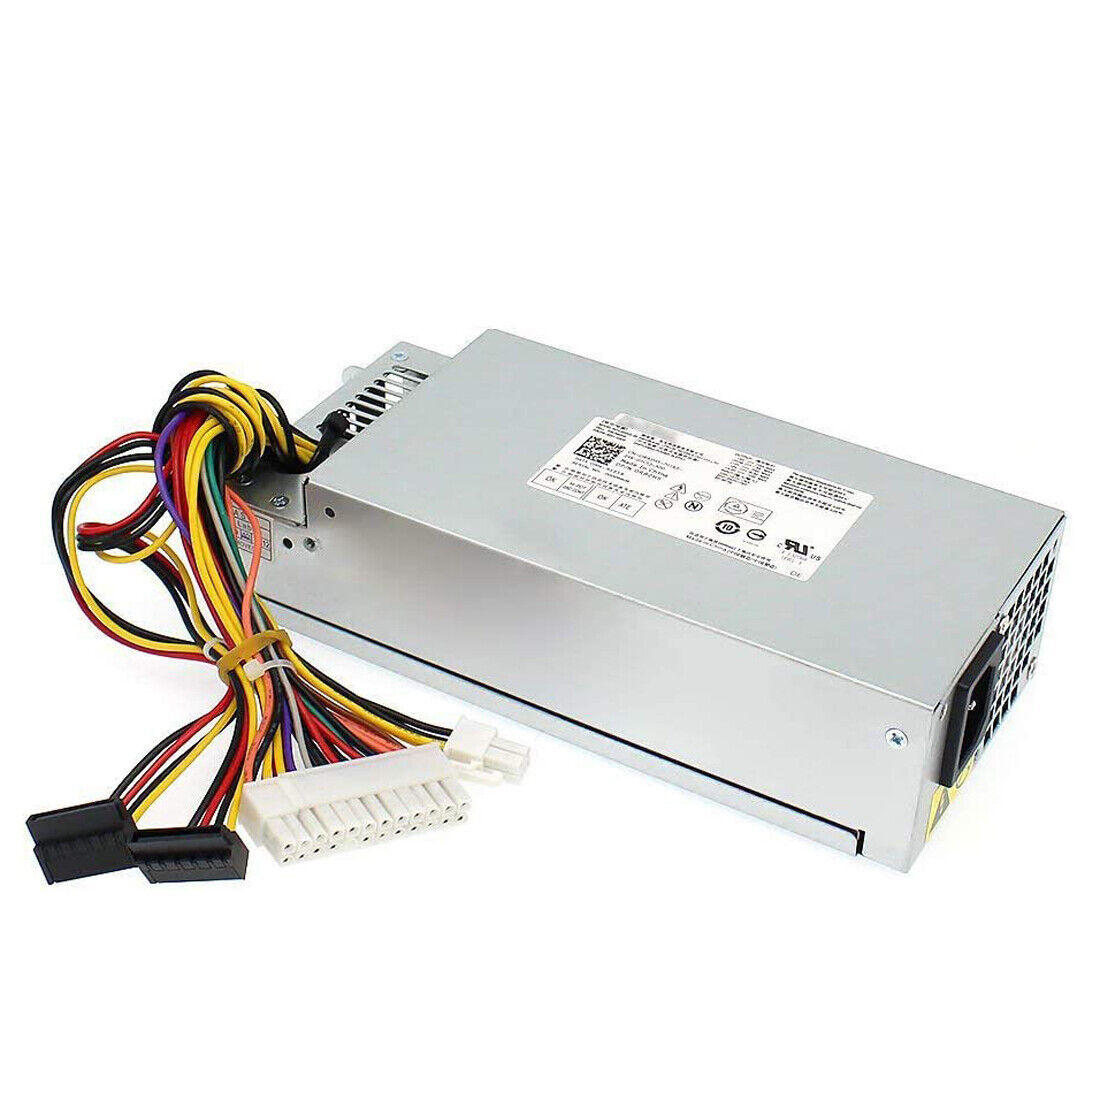 1x Power Supply 220W Fit Dell Inspiron 3647 660s Vostro 270 270s L220AS-00 R82HS